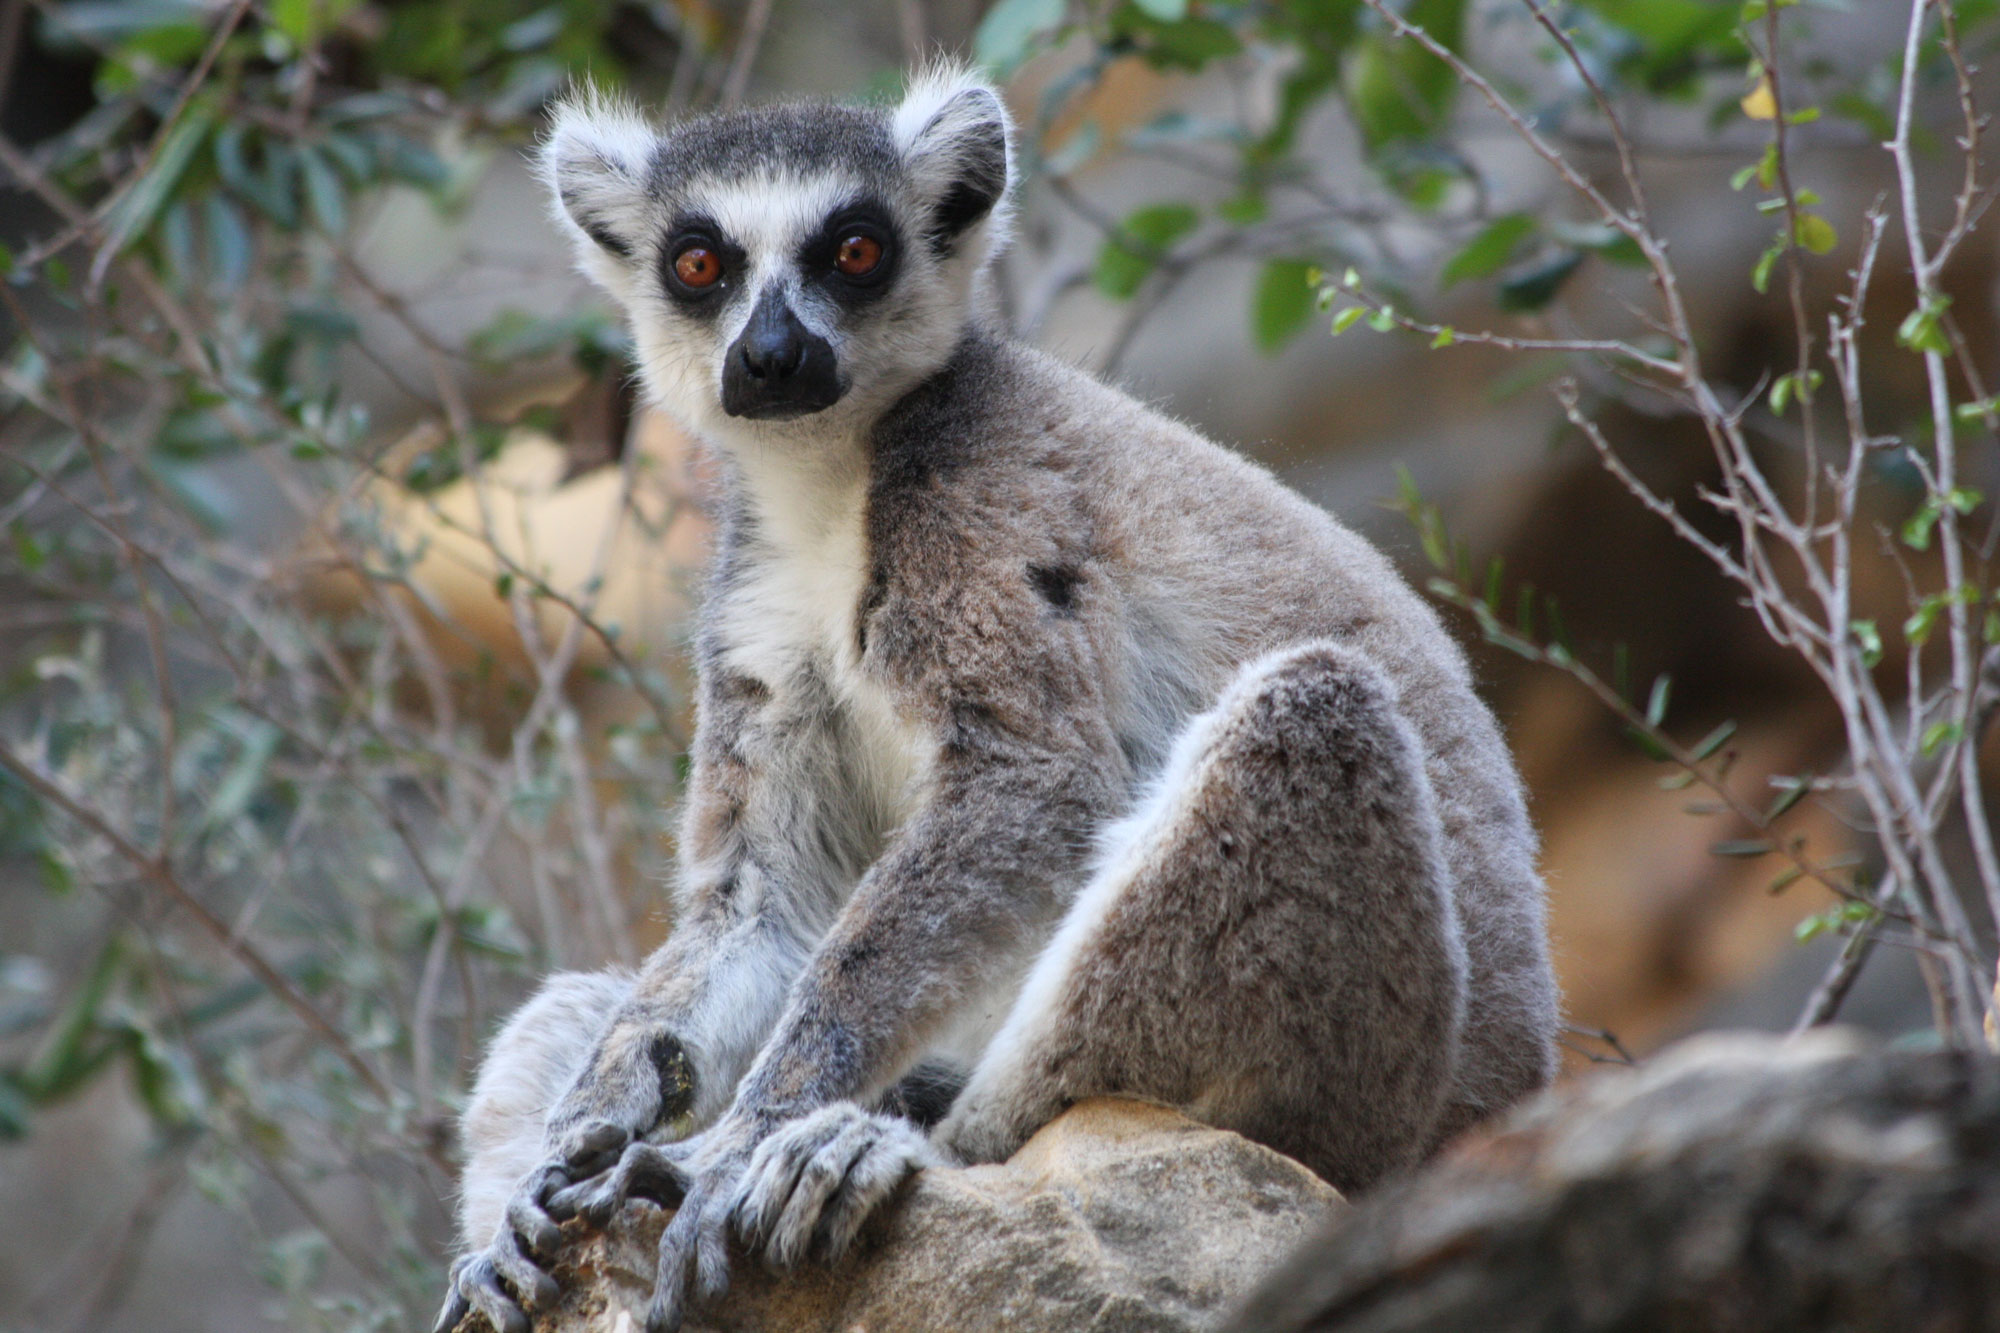 A lemur perched on a rock, seemingly staring right at the camera with golden-brown eyes. Its fur is mostly gray with some black details and white stomach and facial markings. There are branches with small green leaves behind the lemur.